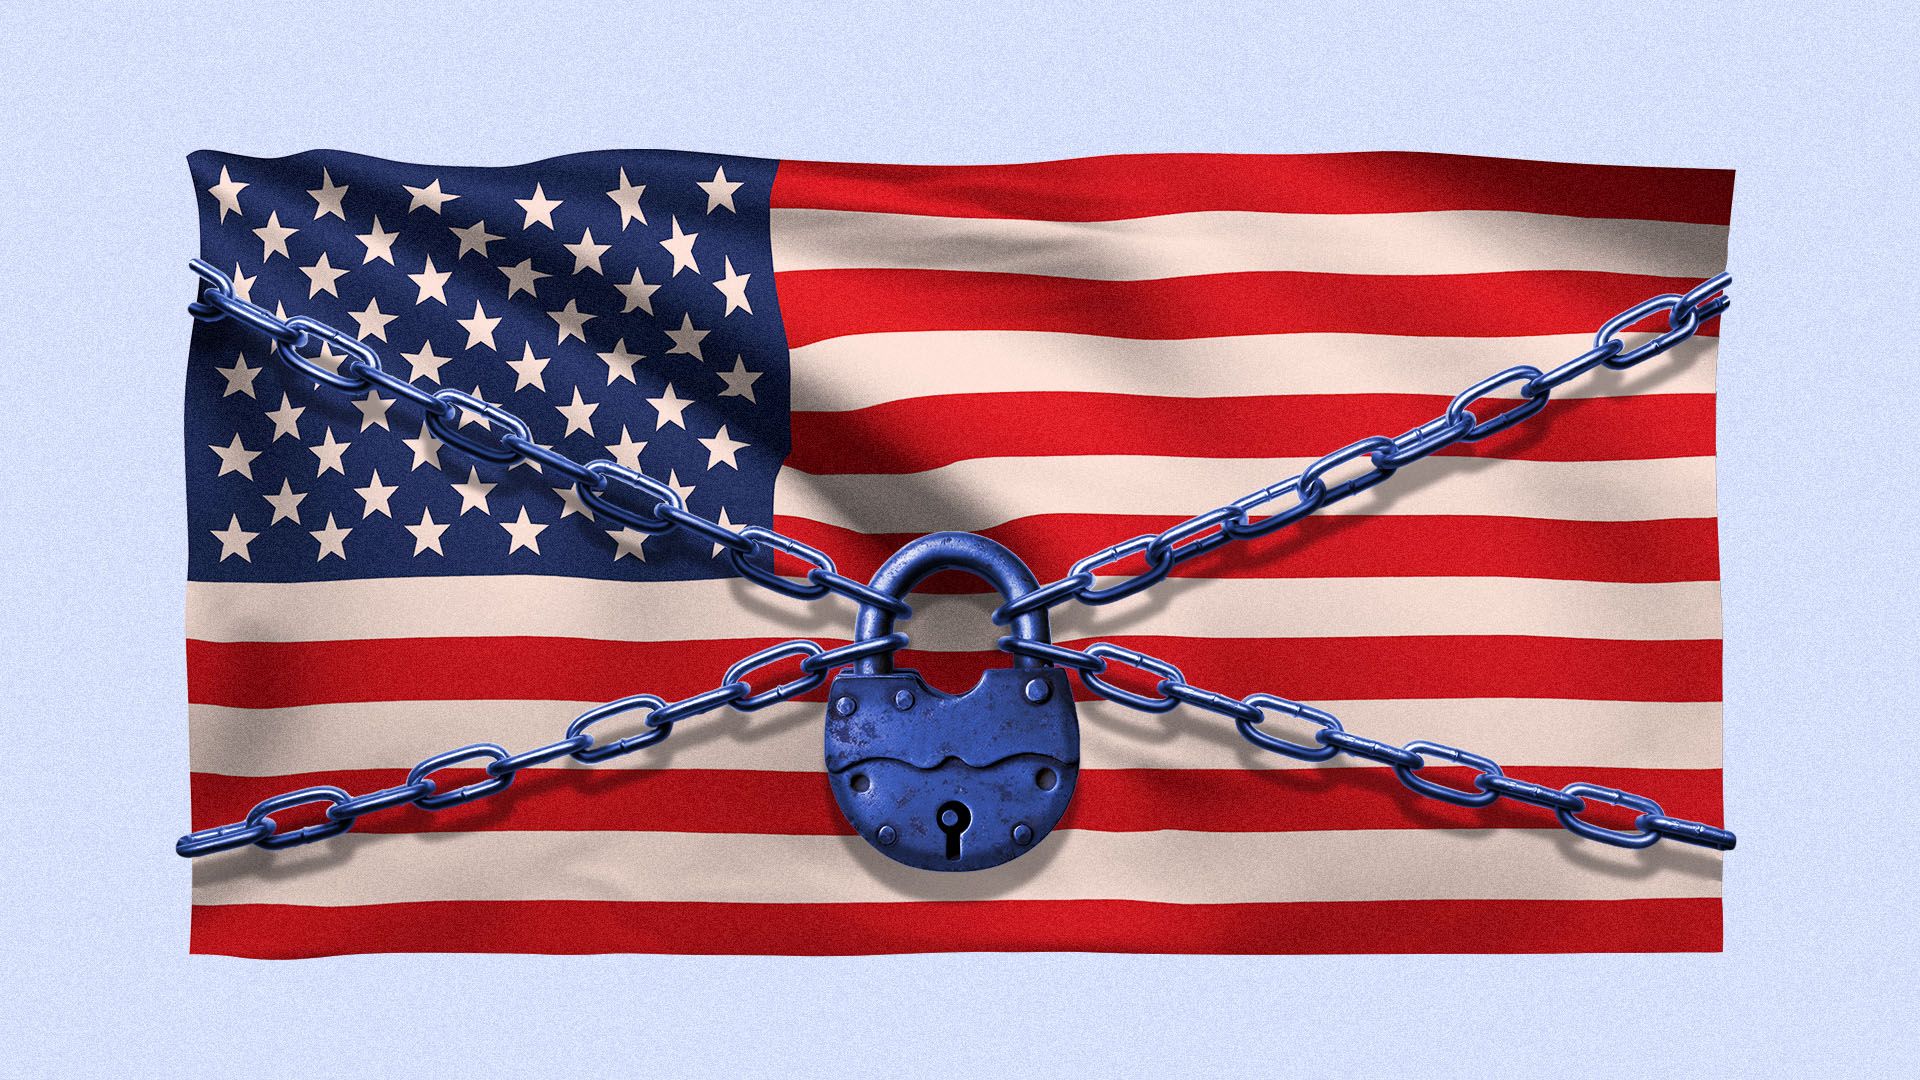 Illustration of the American flag with a chains and lock over it.